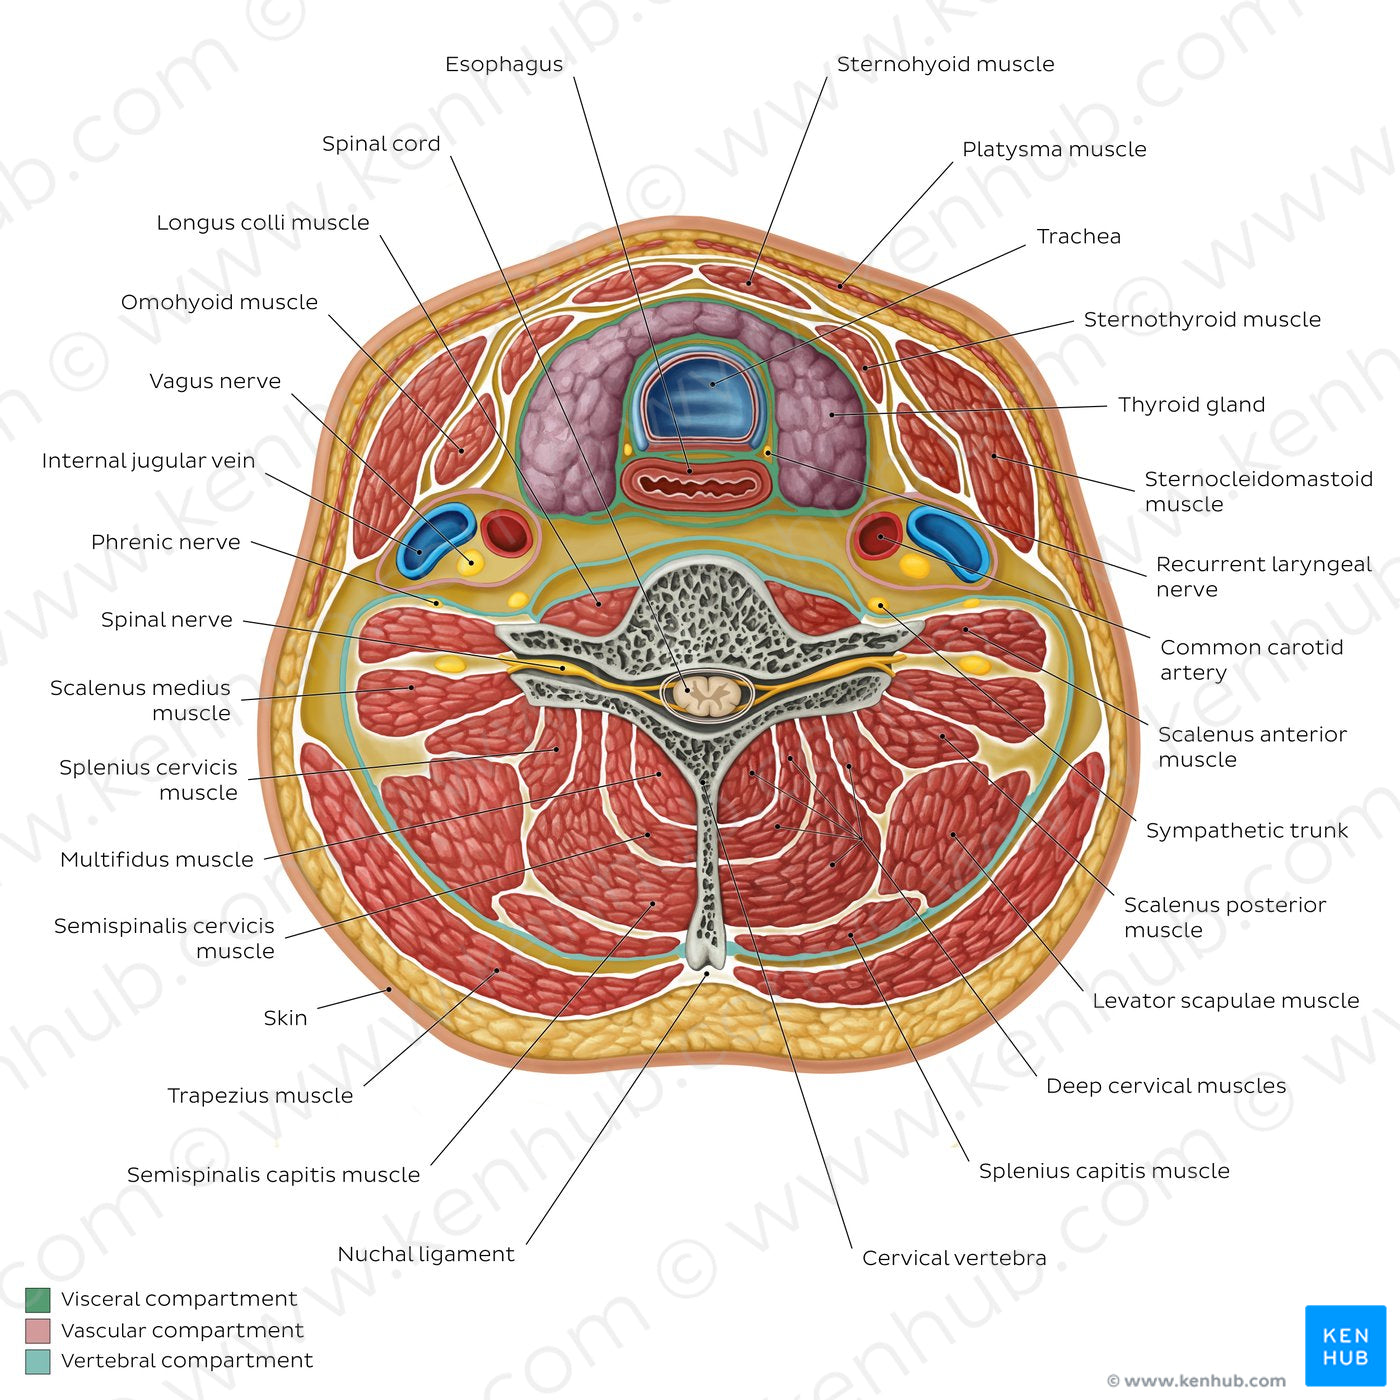 Compartments of the neck: Contents (English)